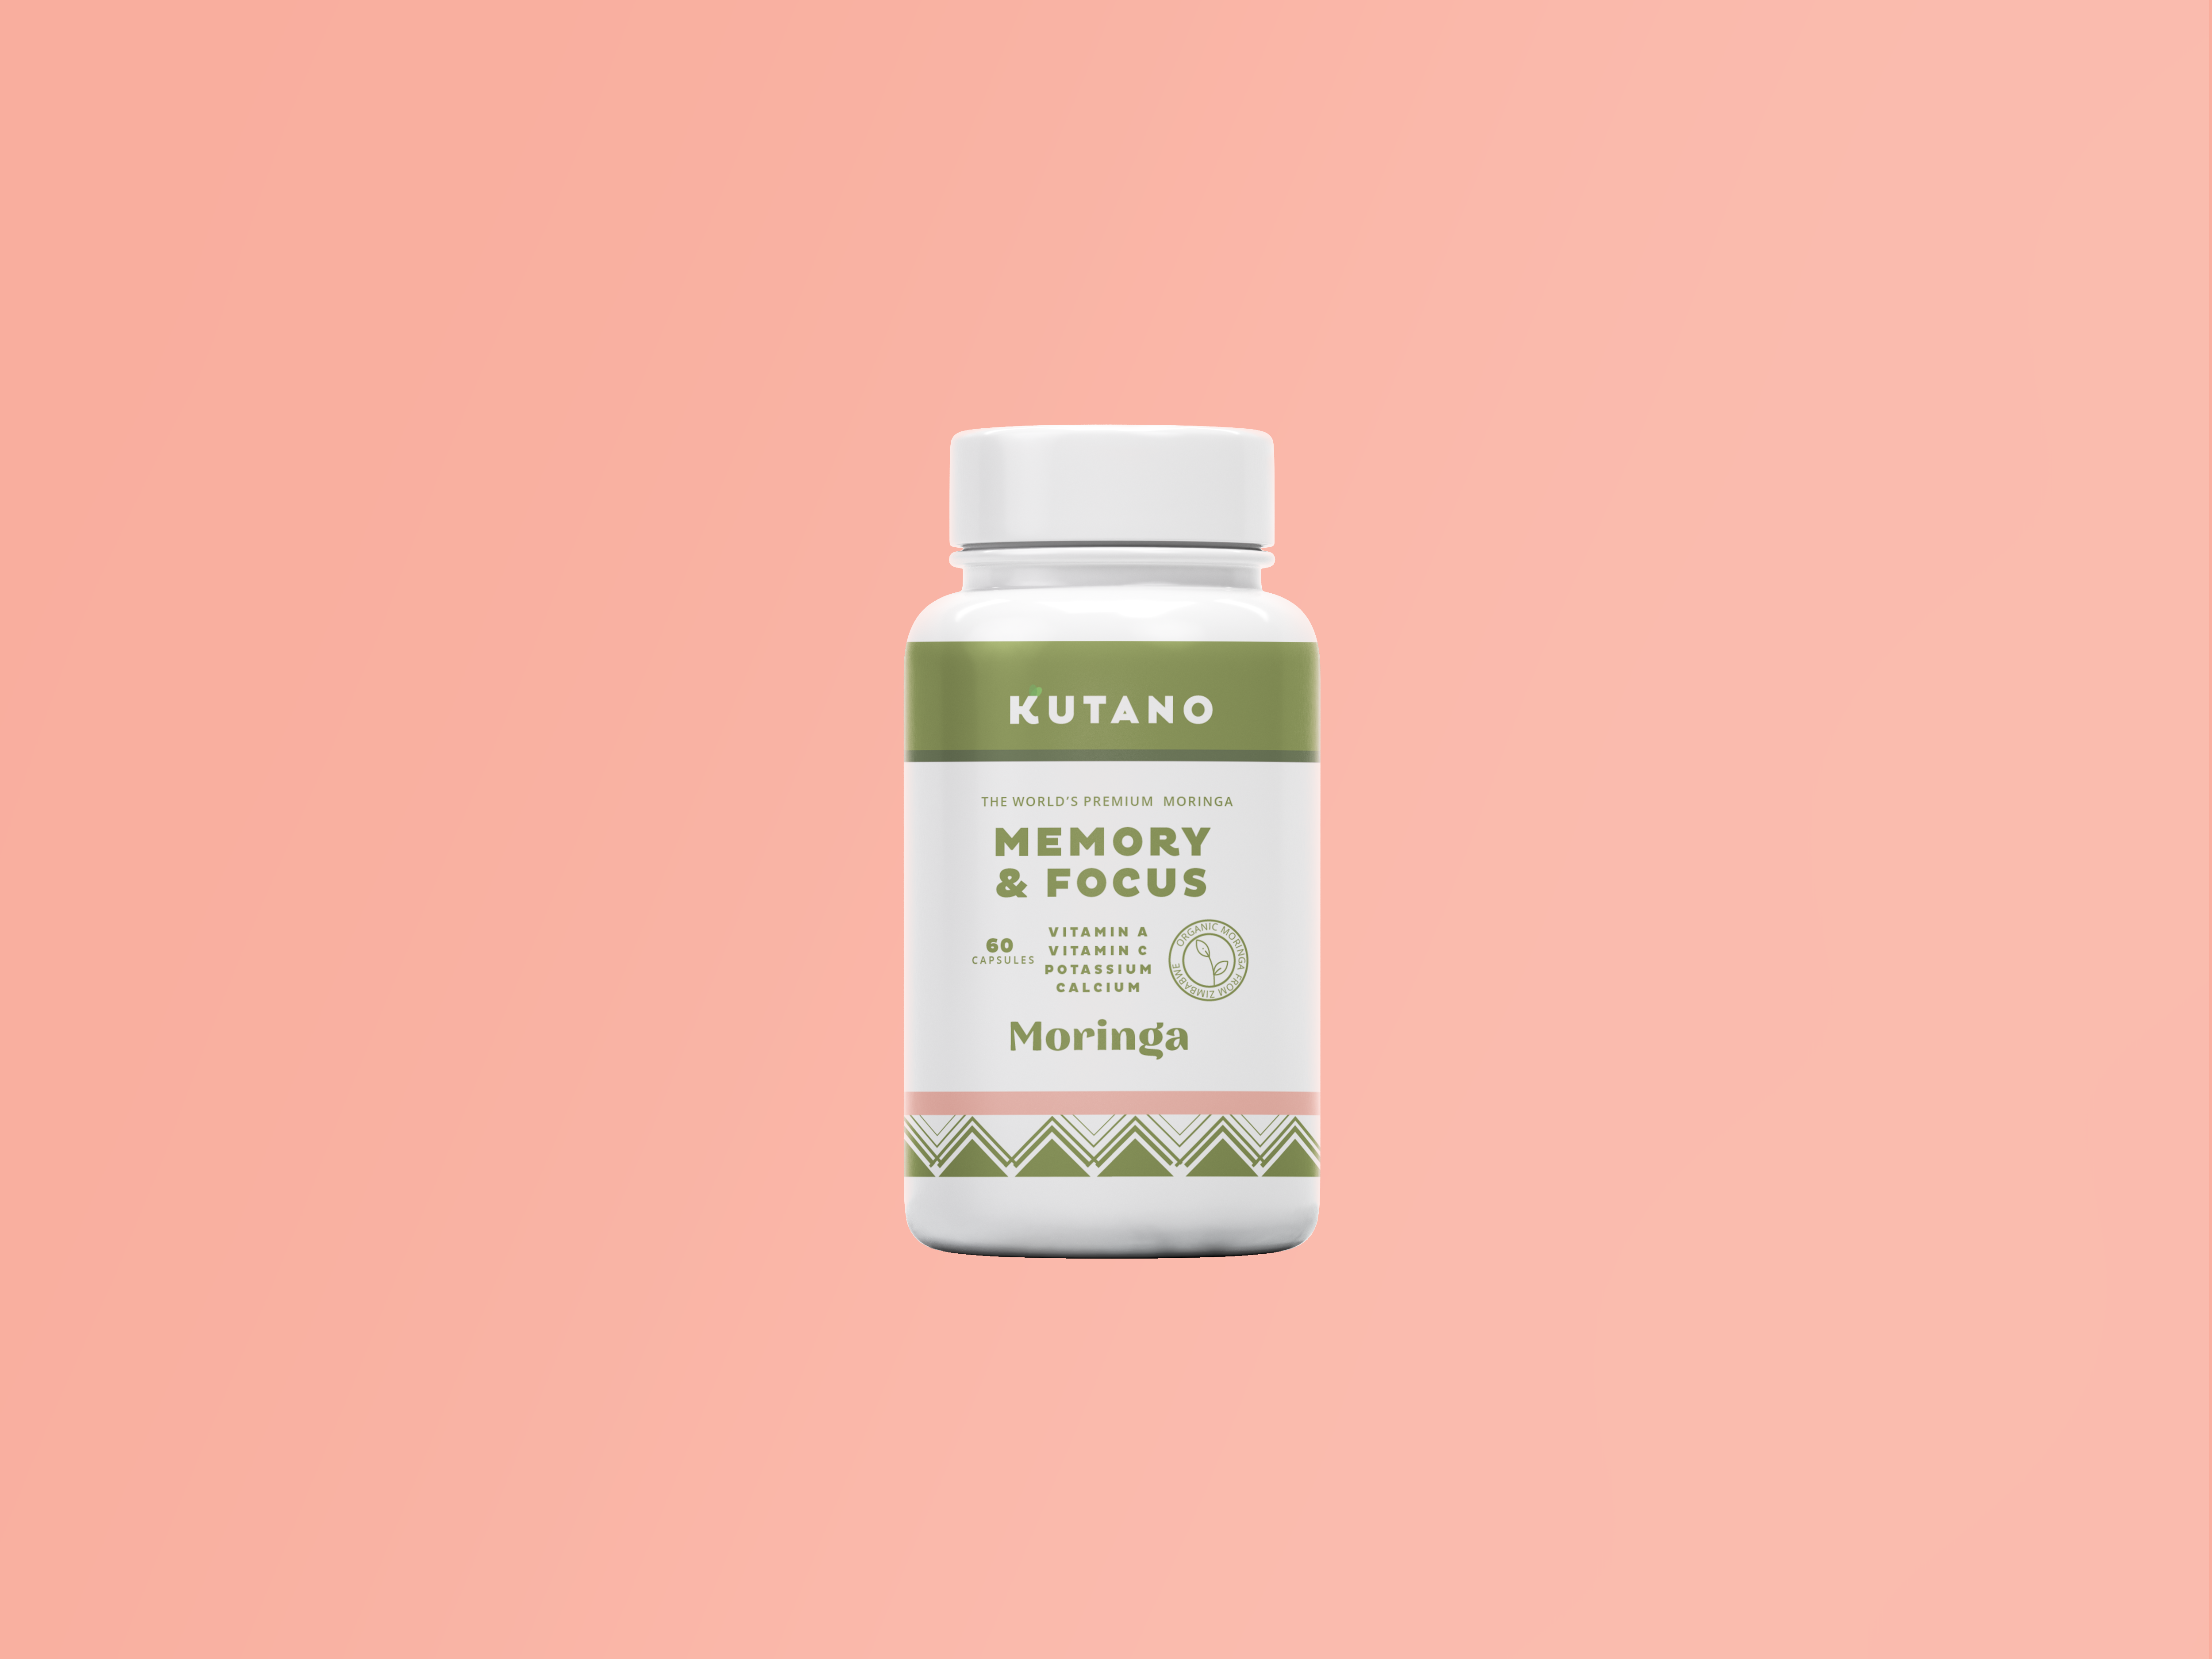 Bonvera is excited to launch Kutano moringa for memory and focus.